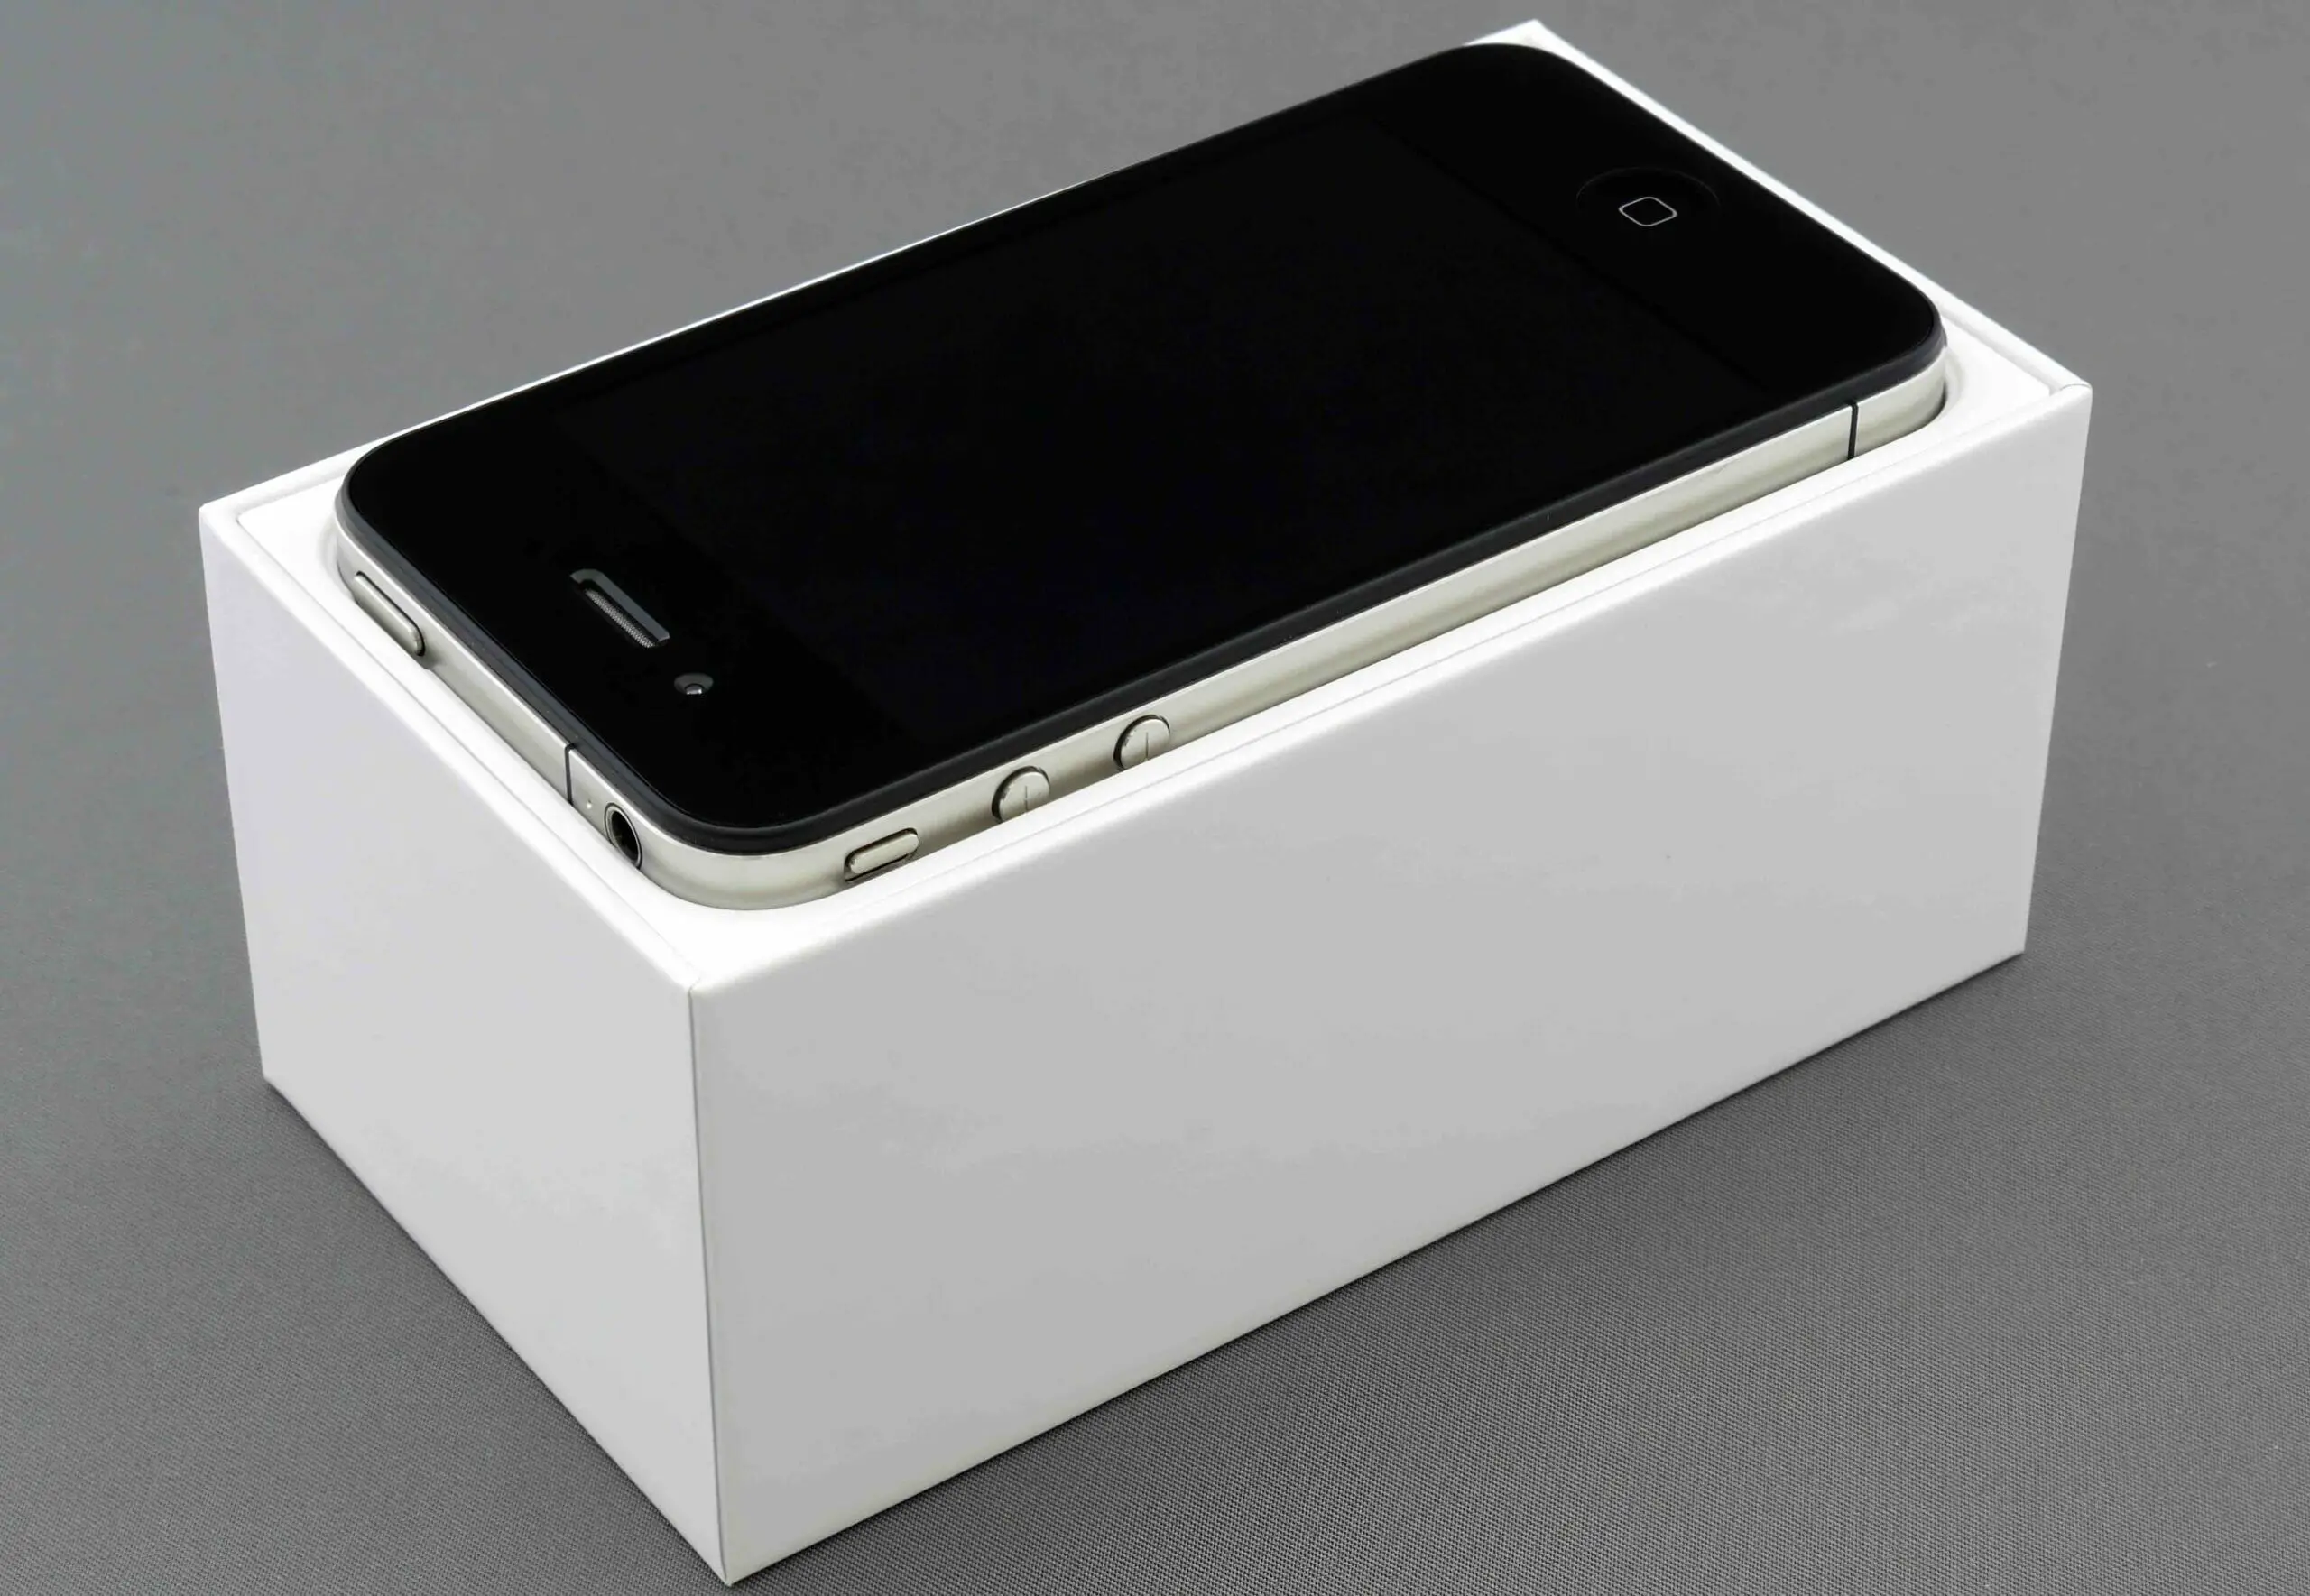 A phone at the top of its white box in a grey table